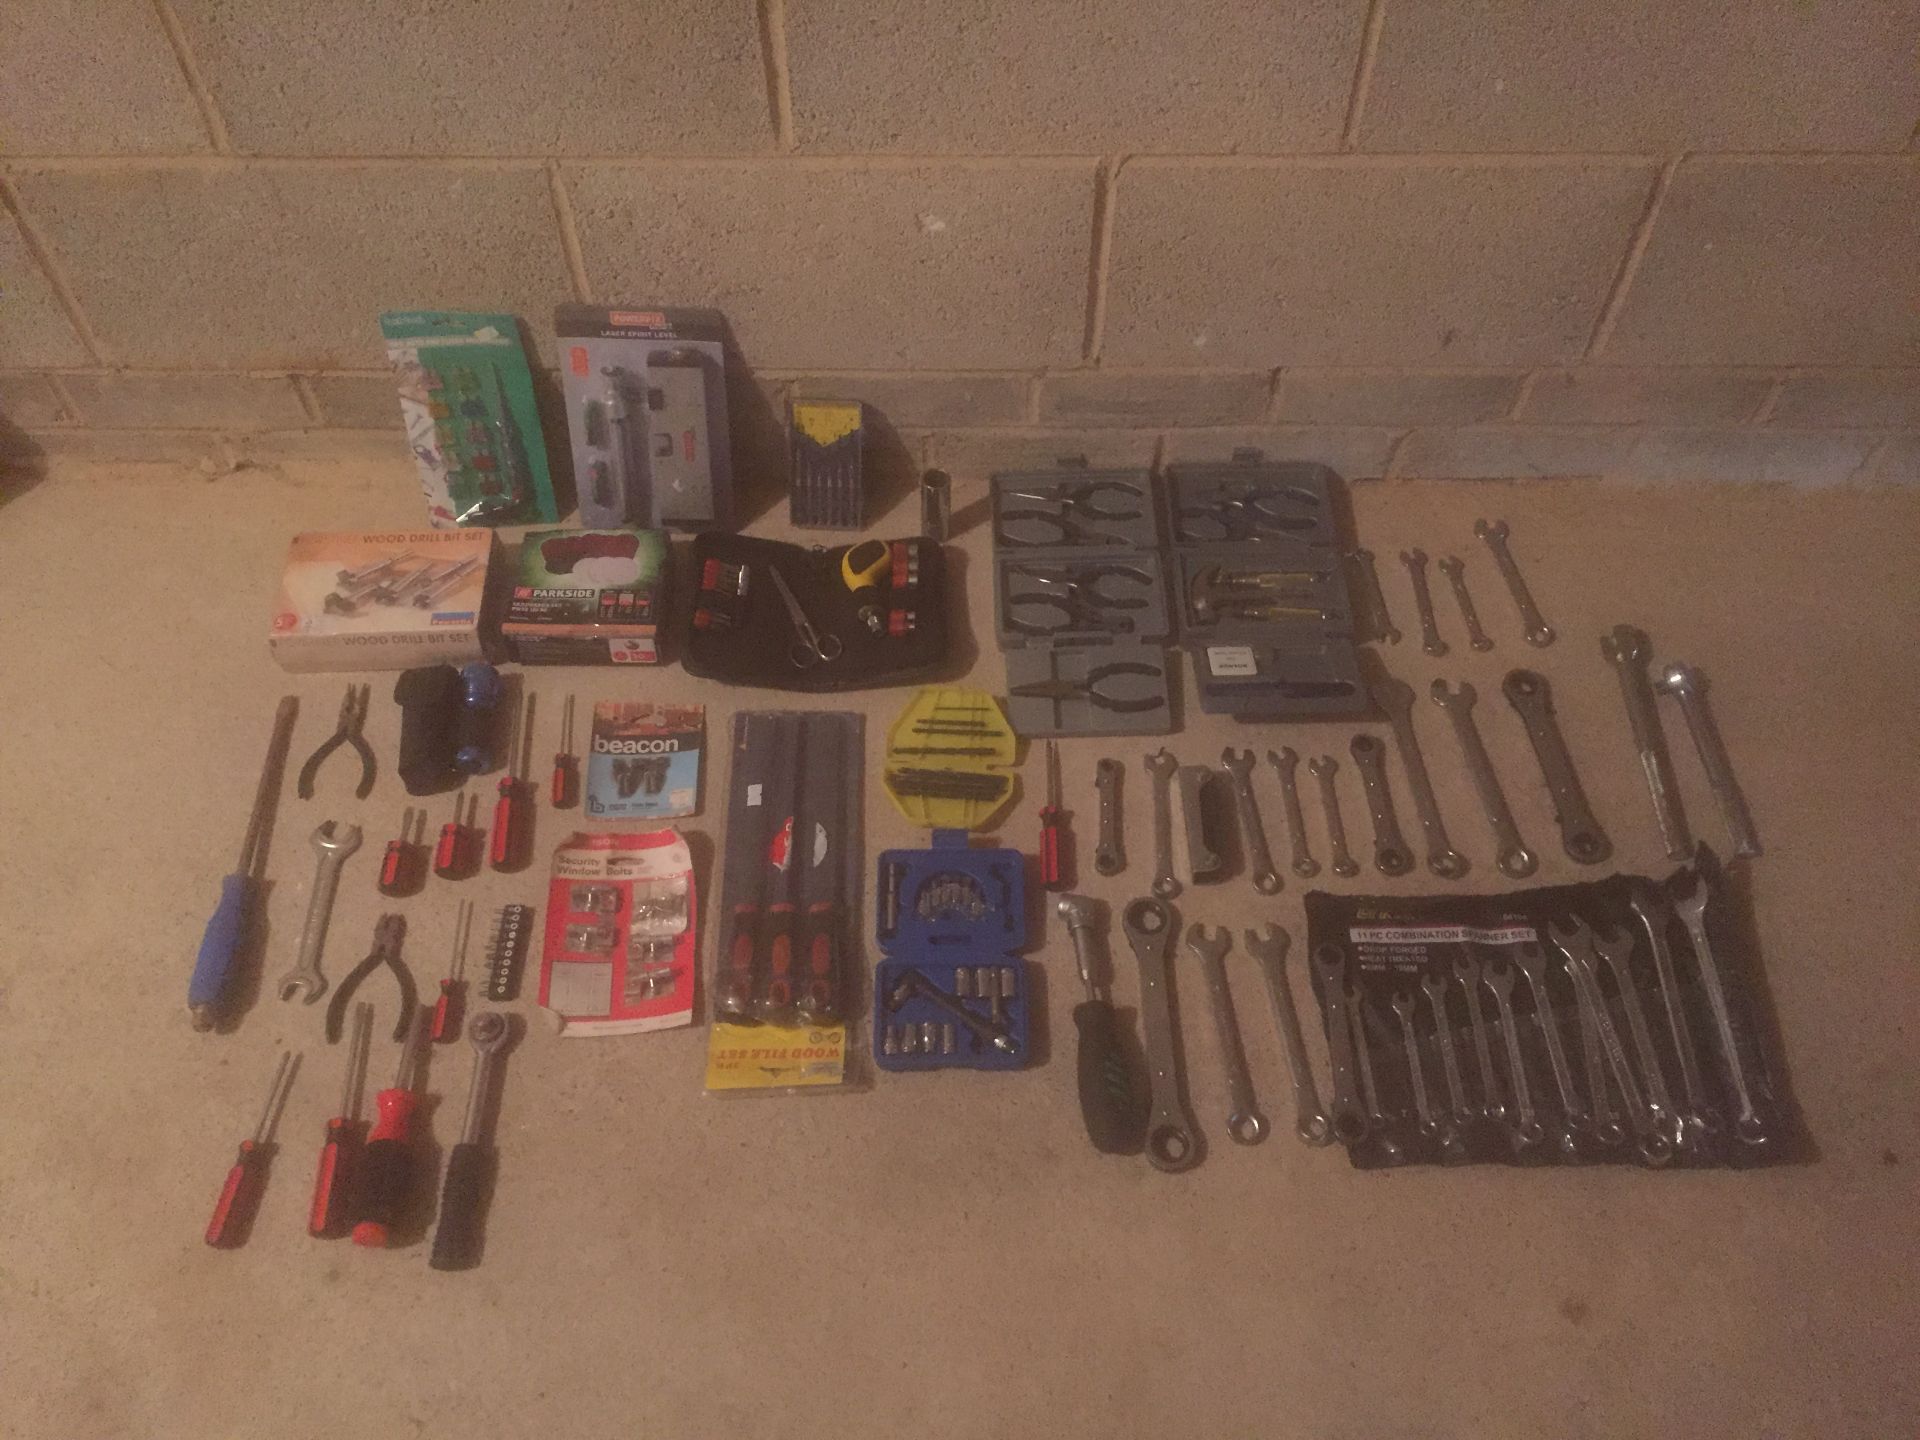 HUGE JOB LOT OF VARIOUS POWER TOOLS, HAND TOOLS, ACCESSORIES, NO RESERVE - Image 4 of 8